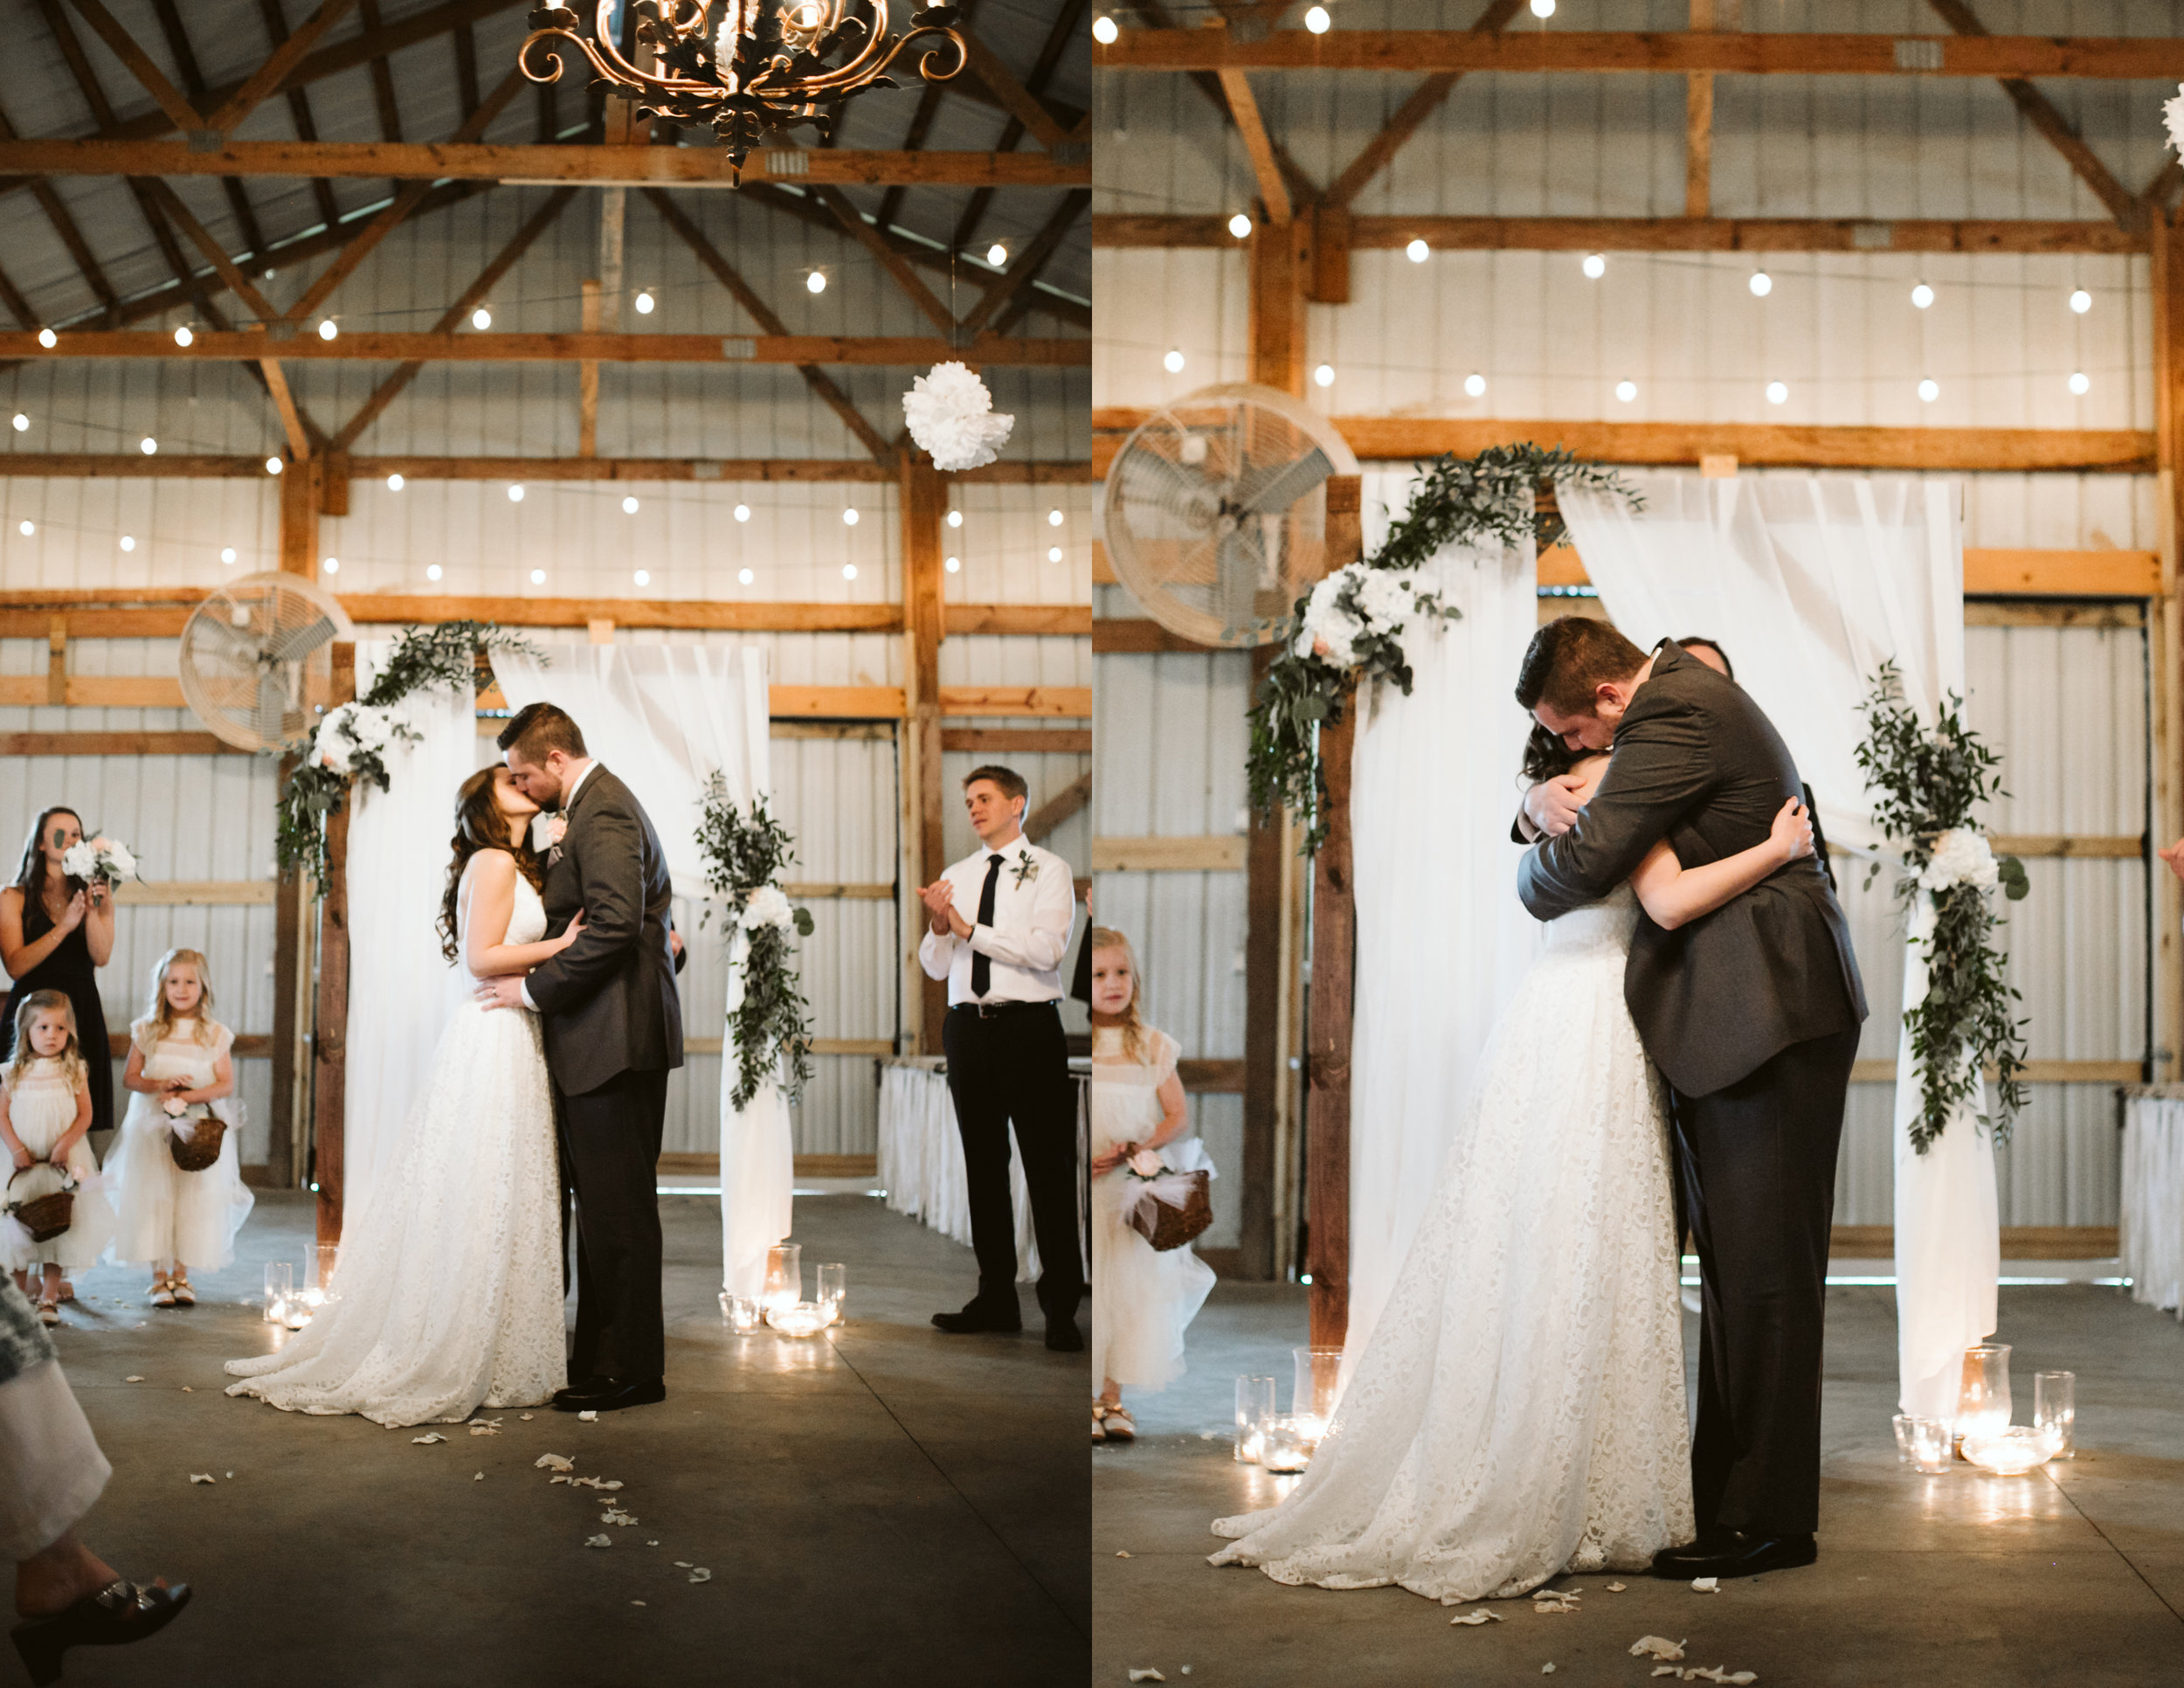 The first kiss at A Rustic Wedding at Barn in the Bend in Nashville, Tennessee